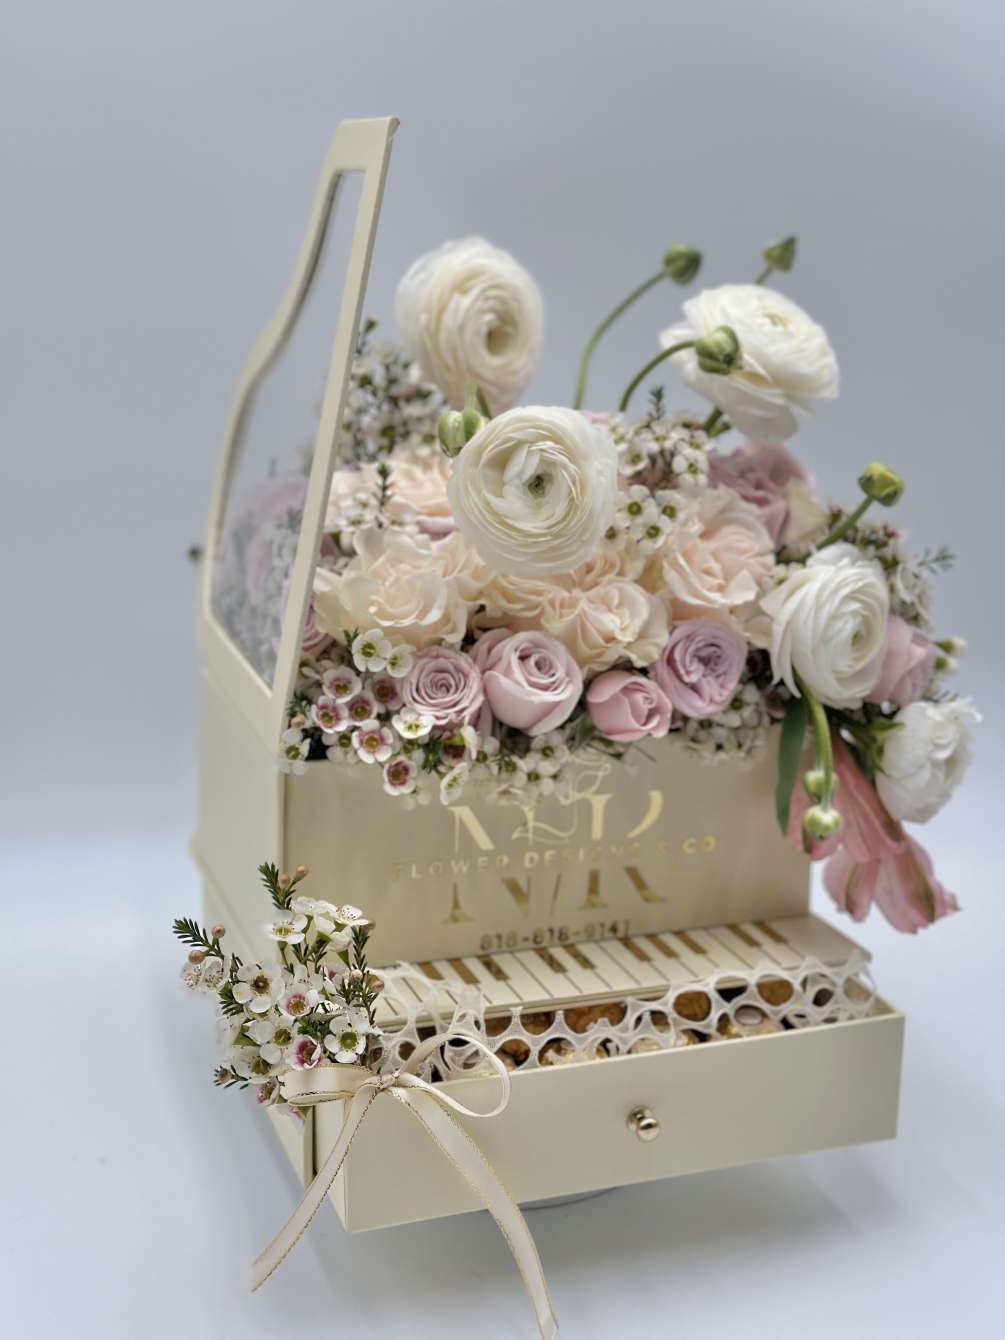 Ranunculus and Rose delicate combination for Spring! This piano box arrangement comes